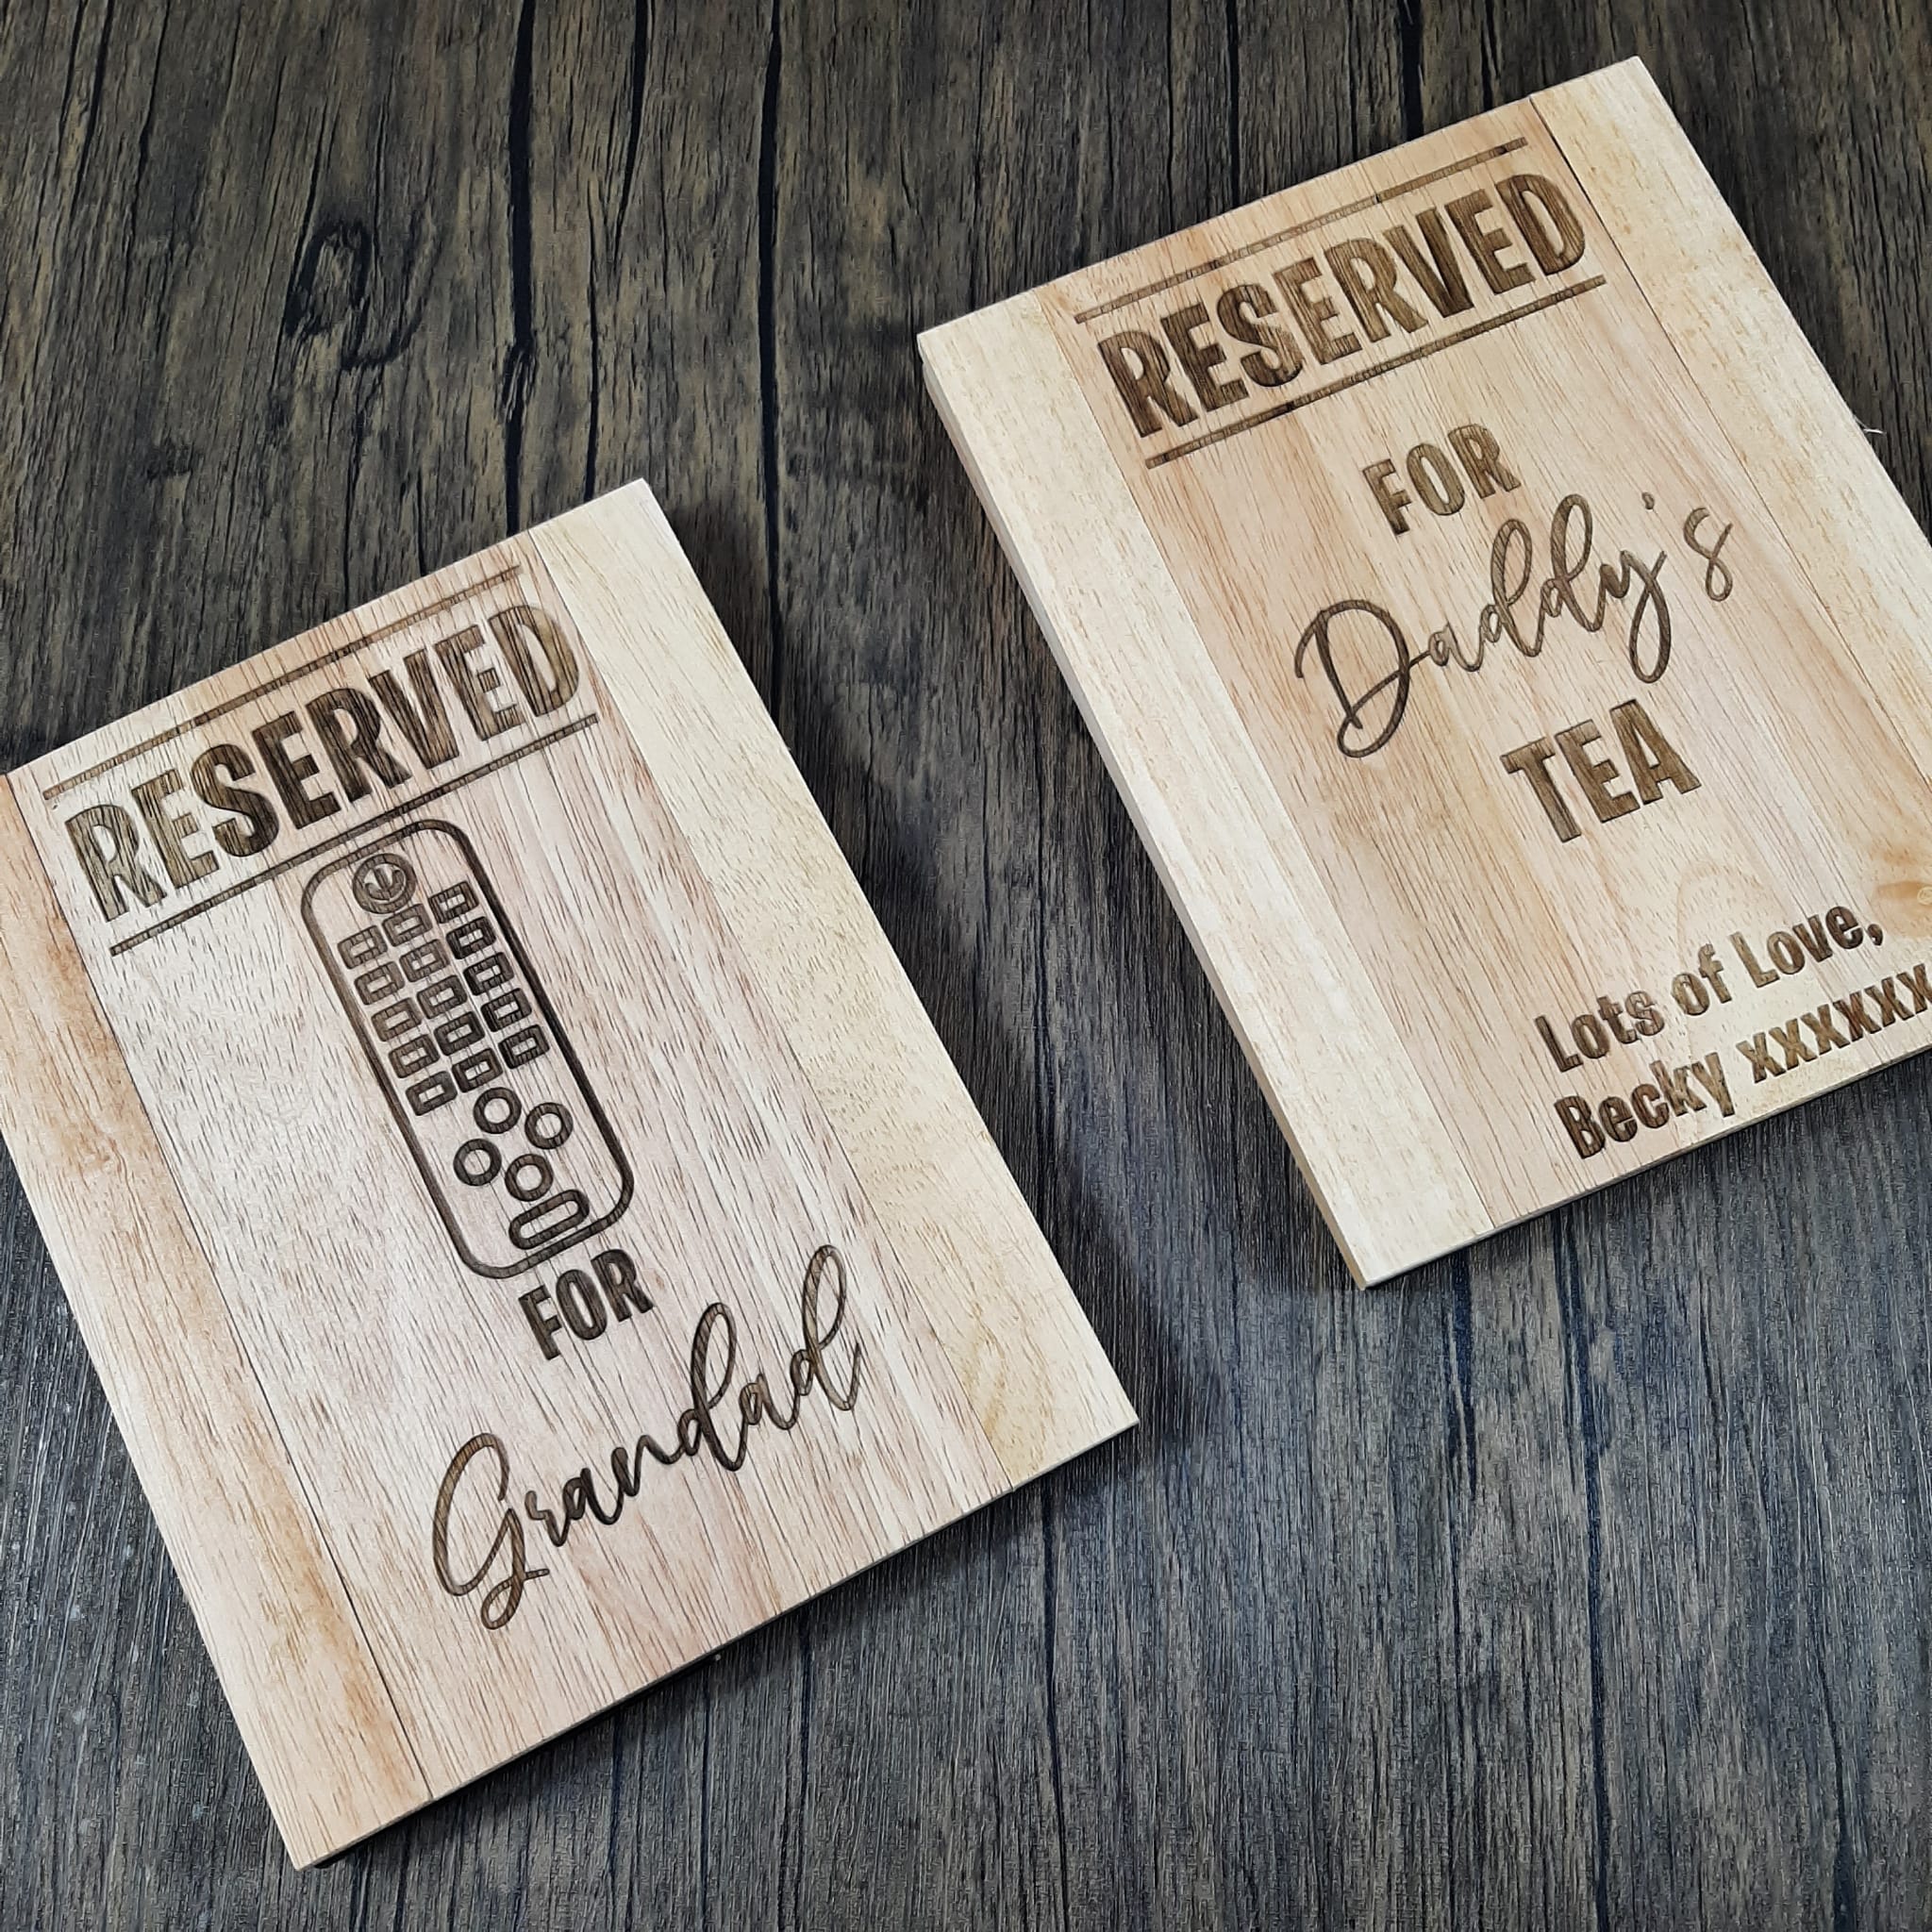 Wooden sofa arm tray with laser engraved personalisation featuring reserved for beer or tea, great gift for him or gift for her with special remote control design